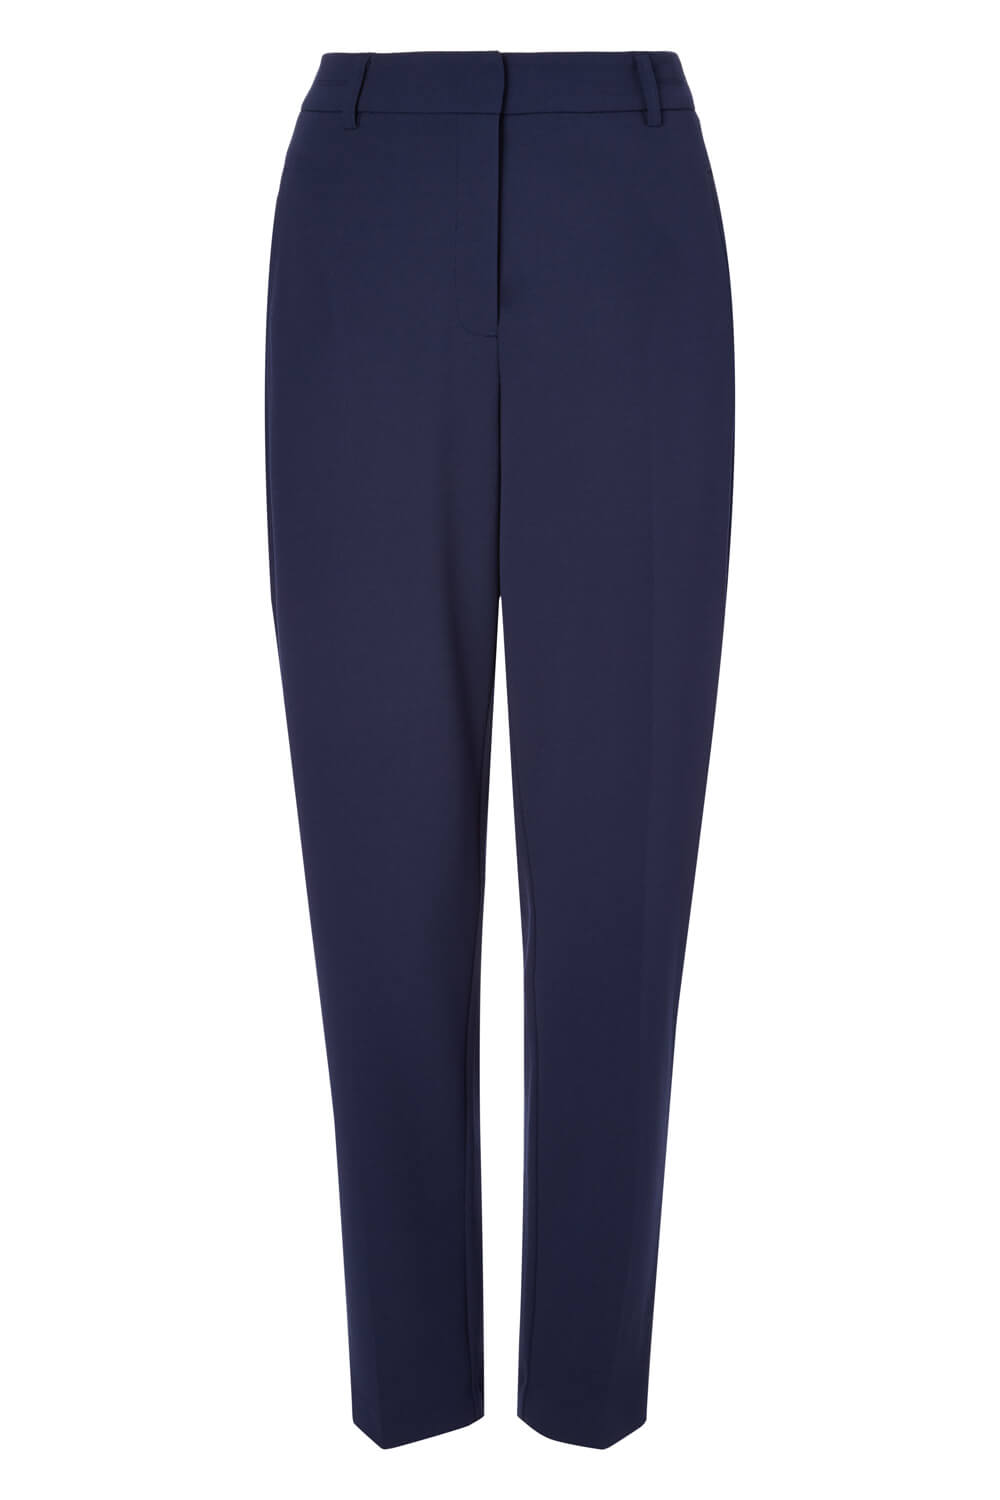 Navy  Tailored Pleated Trouser, Image 5 of 5